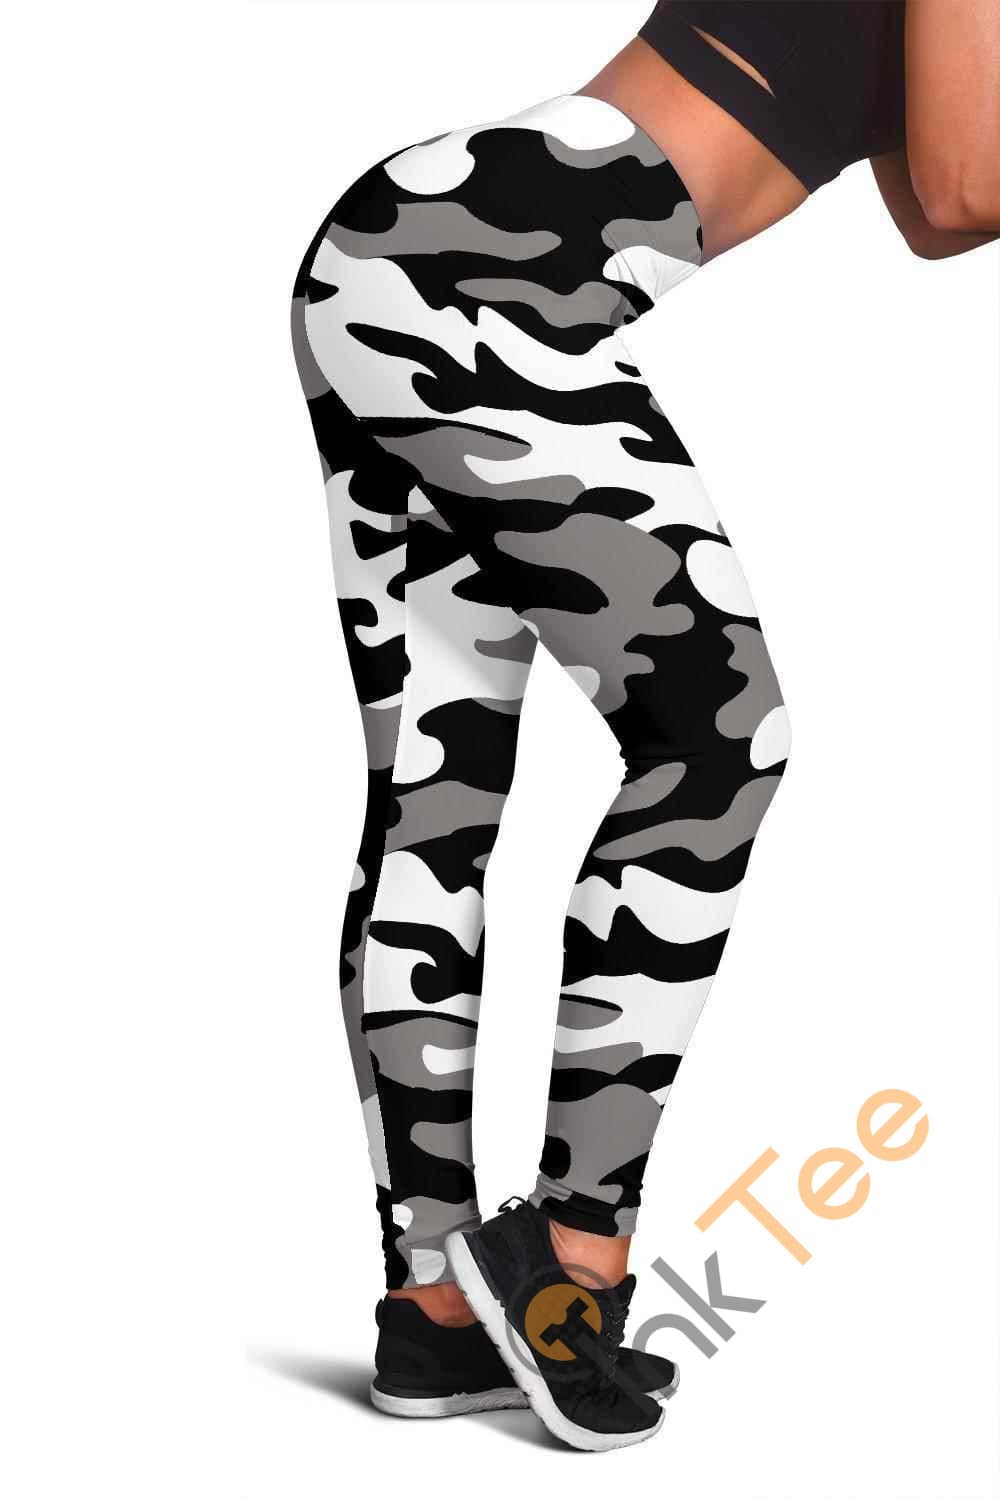 Inktee Store - Chicago White Sox Inspired Tru Camo 3D All Over Print For Yoga Fitness Fashion Women'S Leggings Image